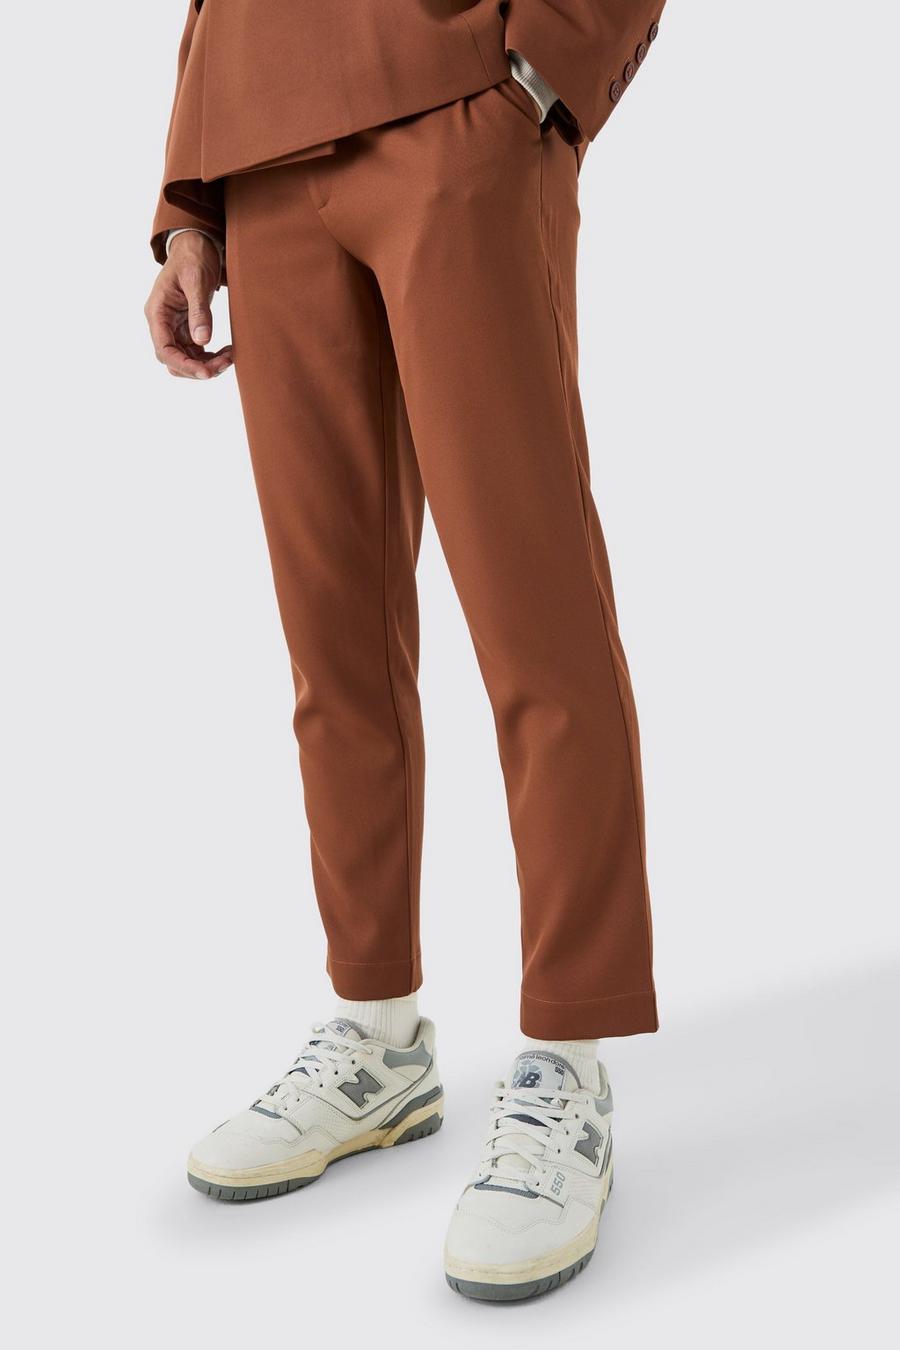 Rust Mix & Match Tailored Slim Cropped Pants